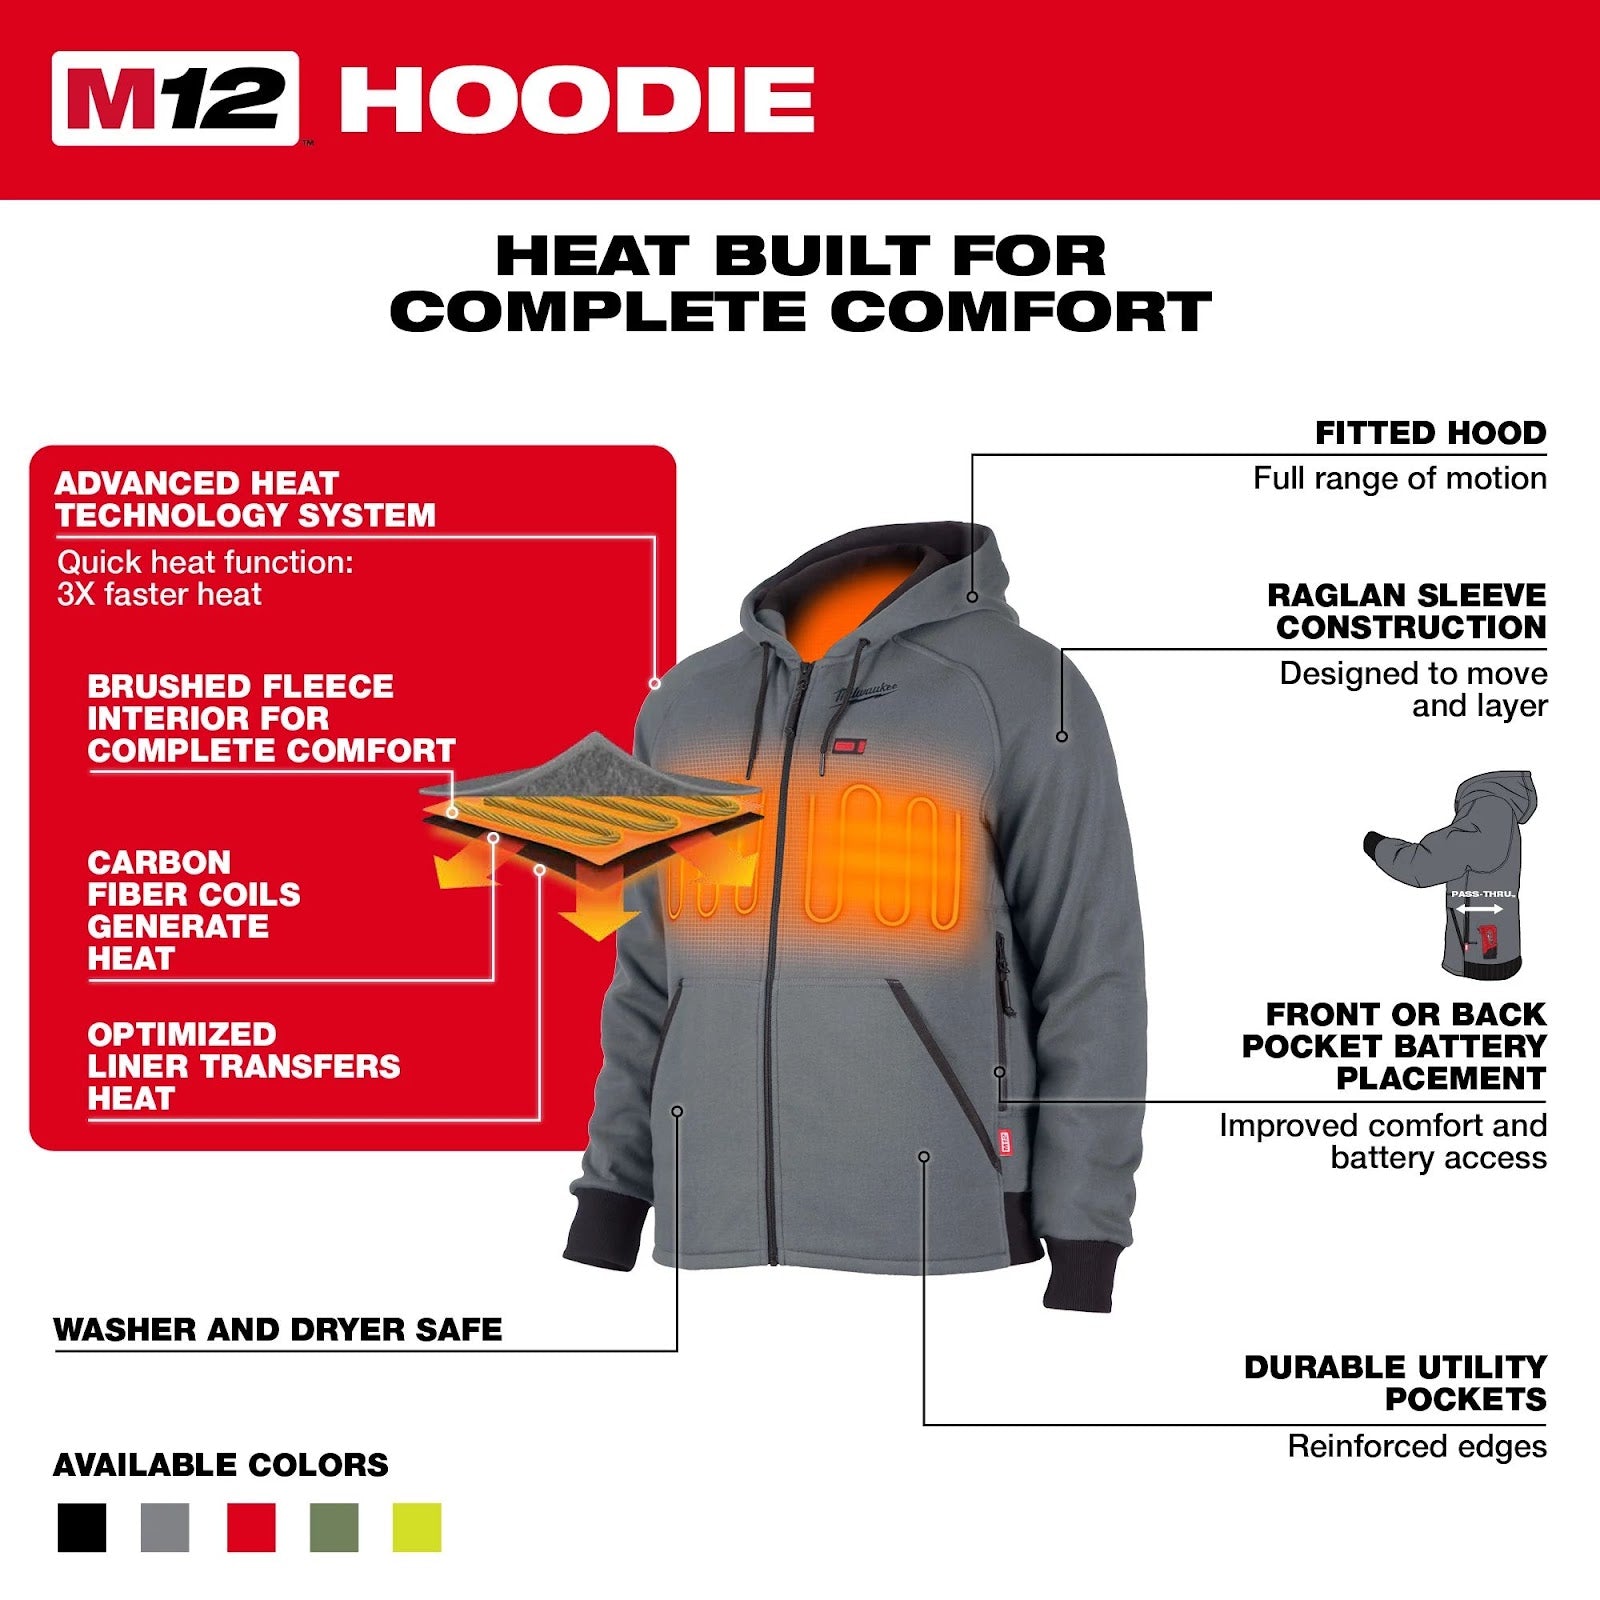 Milwaukee Heated Hoodie and technology call out